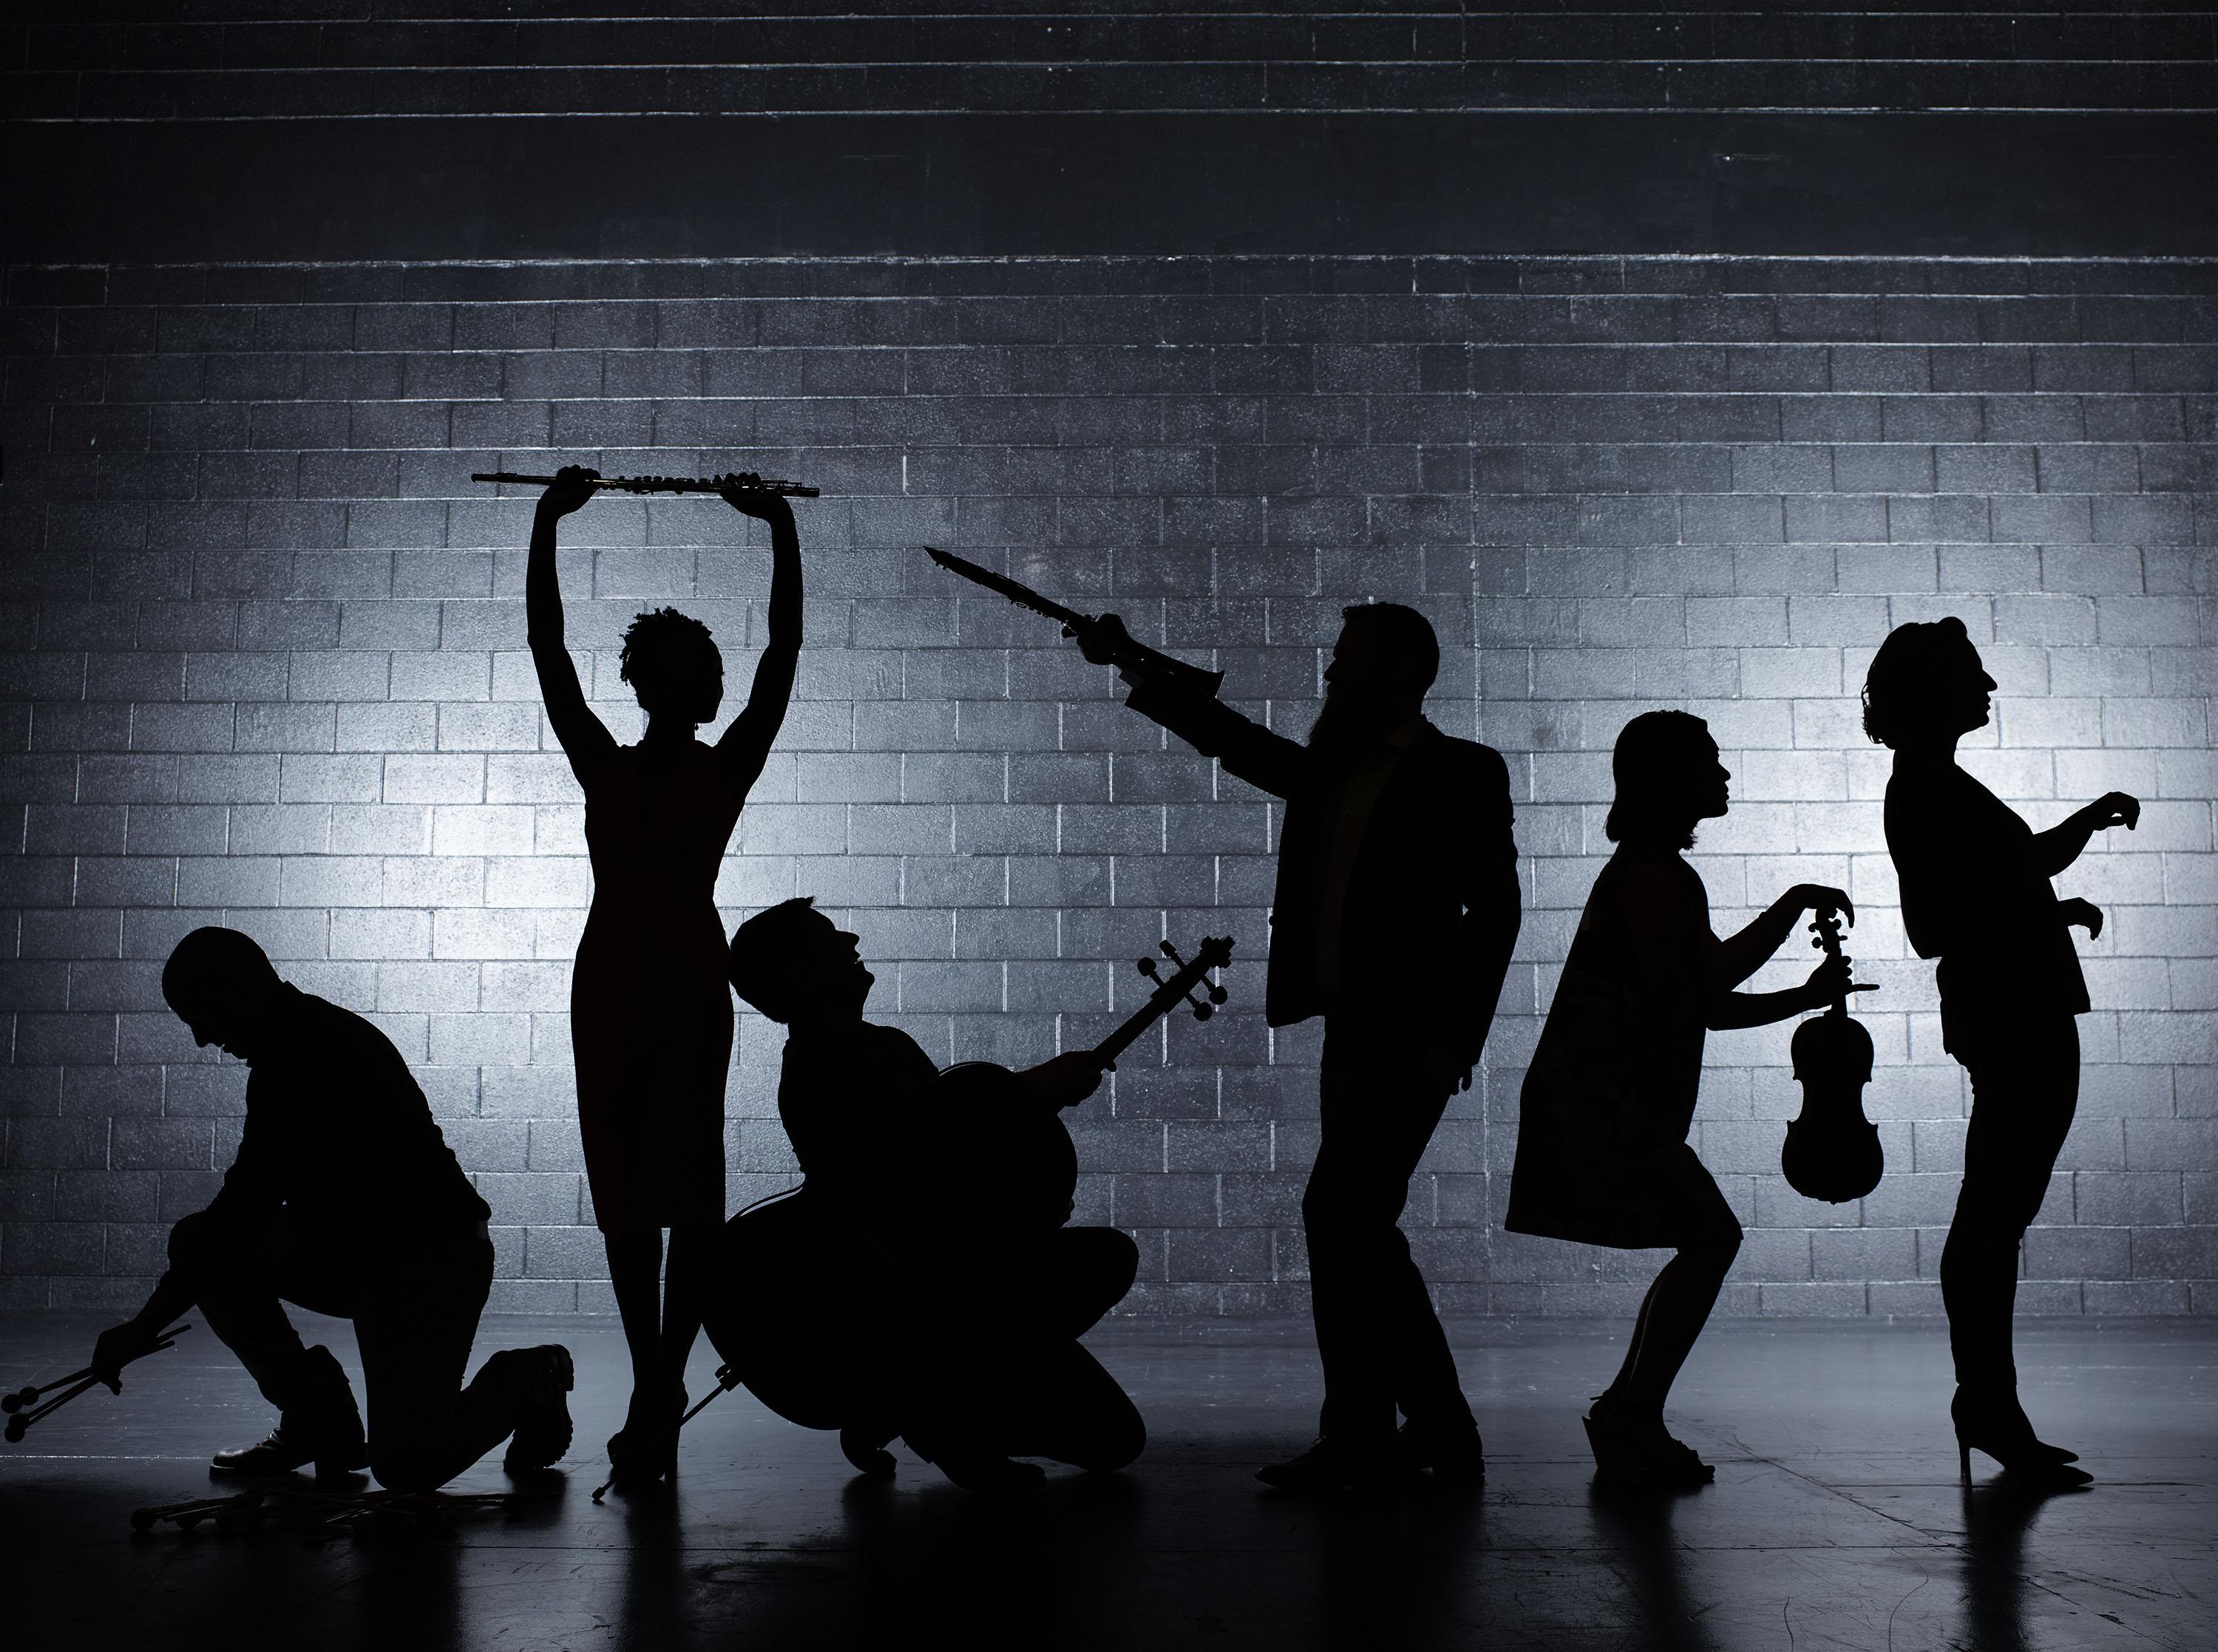 Black silhouettes of three men and three women hold instruments in unusual ways, in front of a grey brick wall.